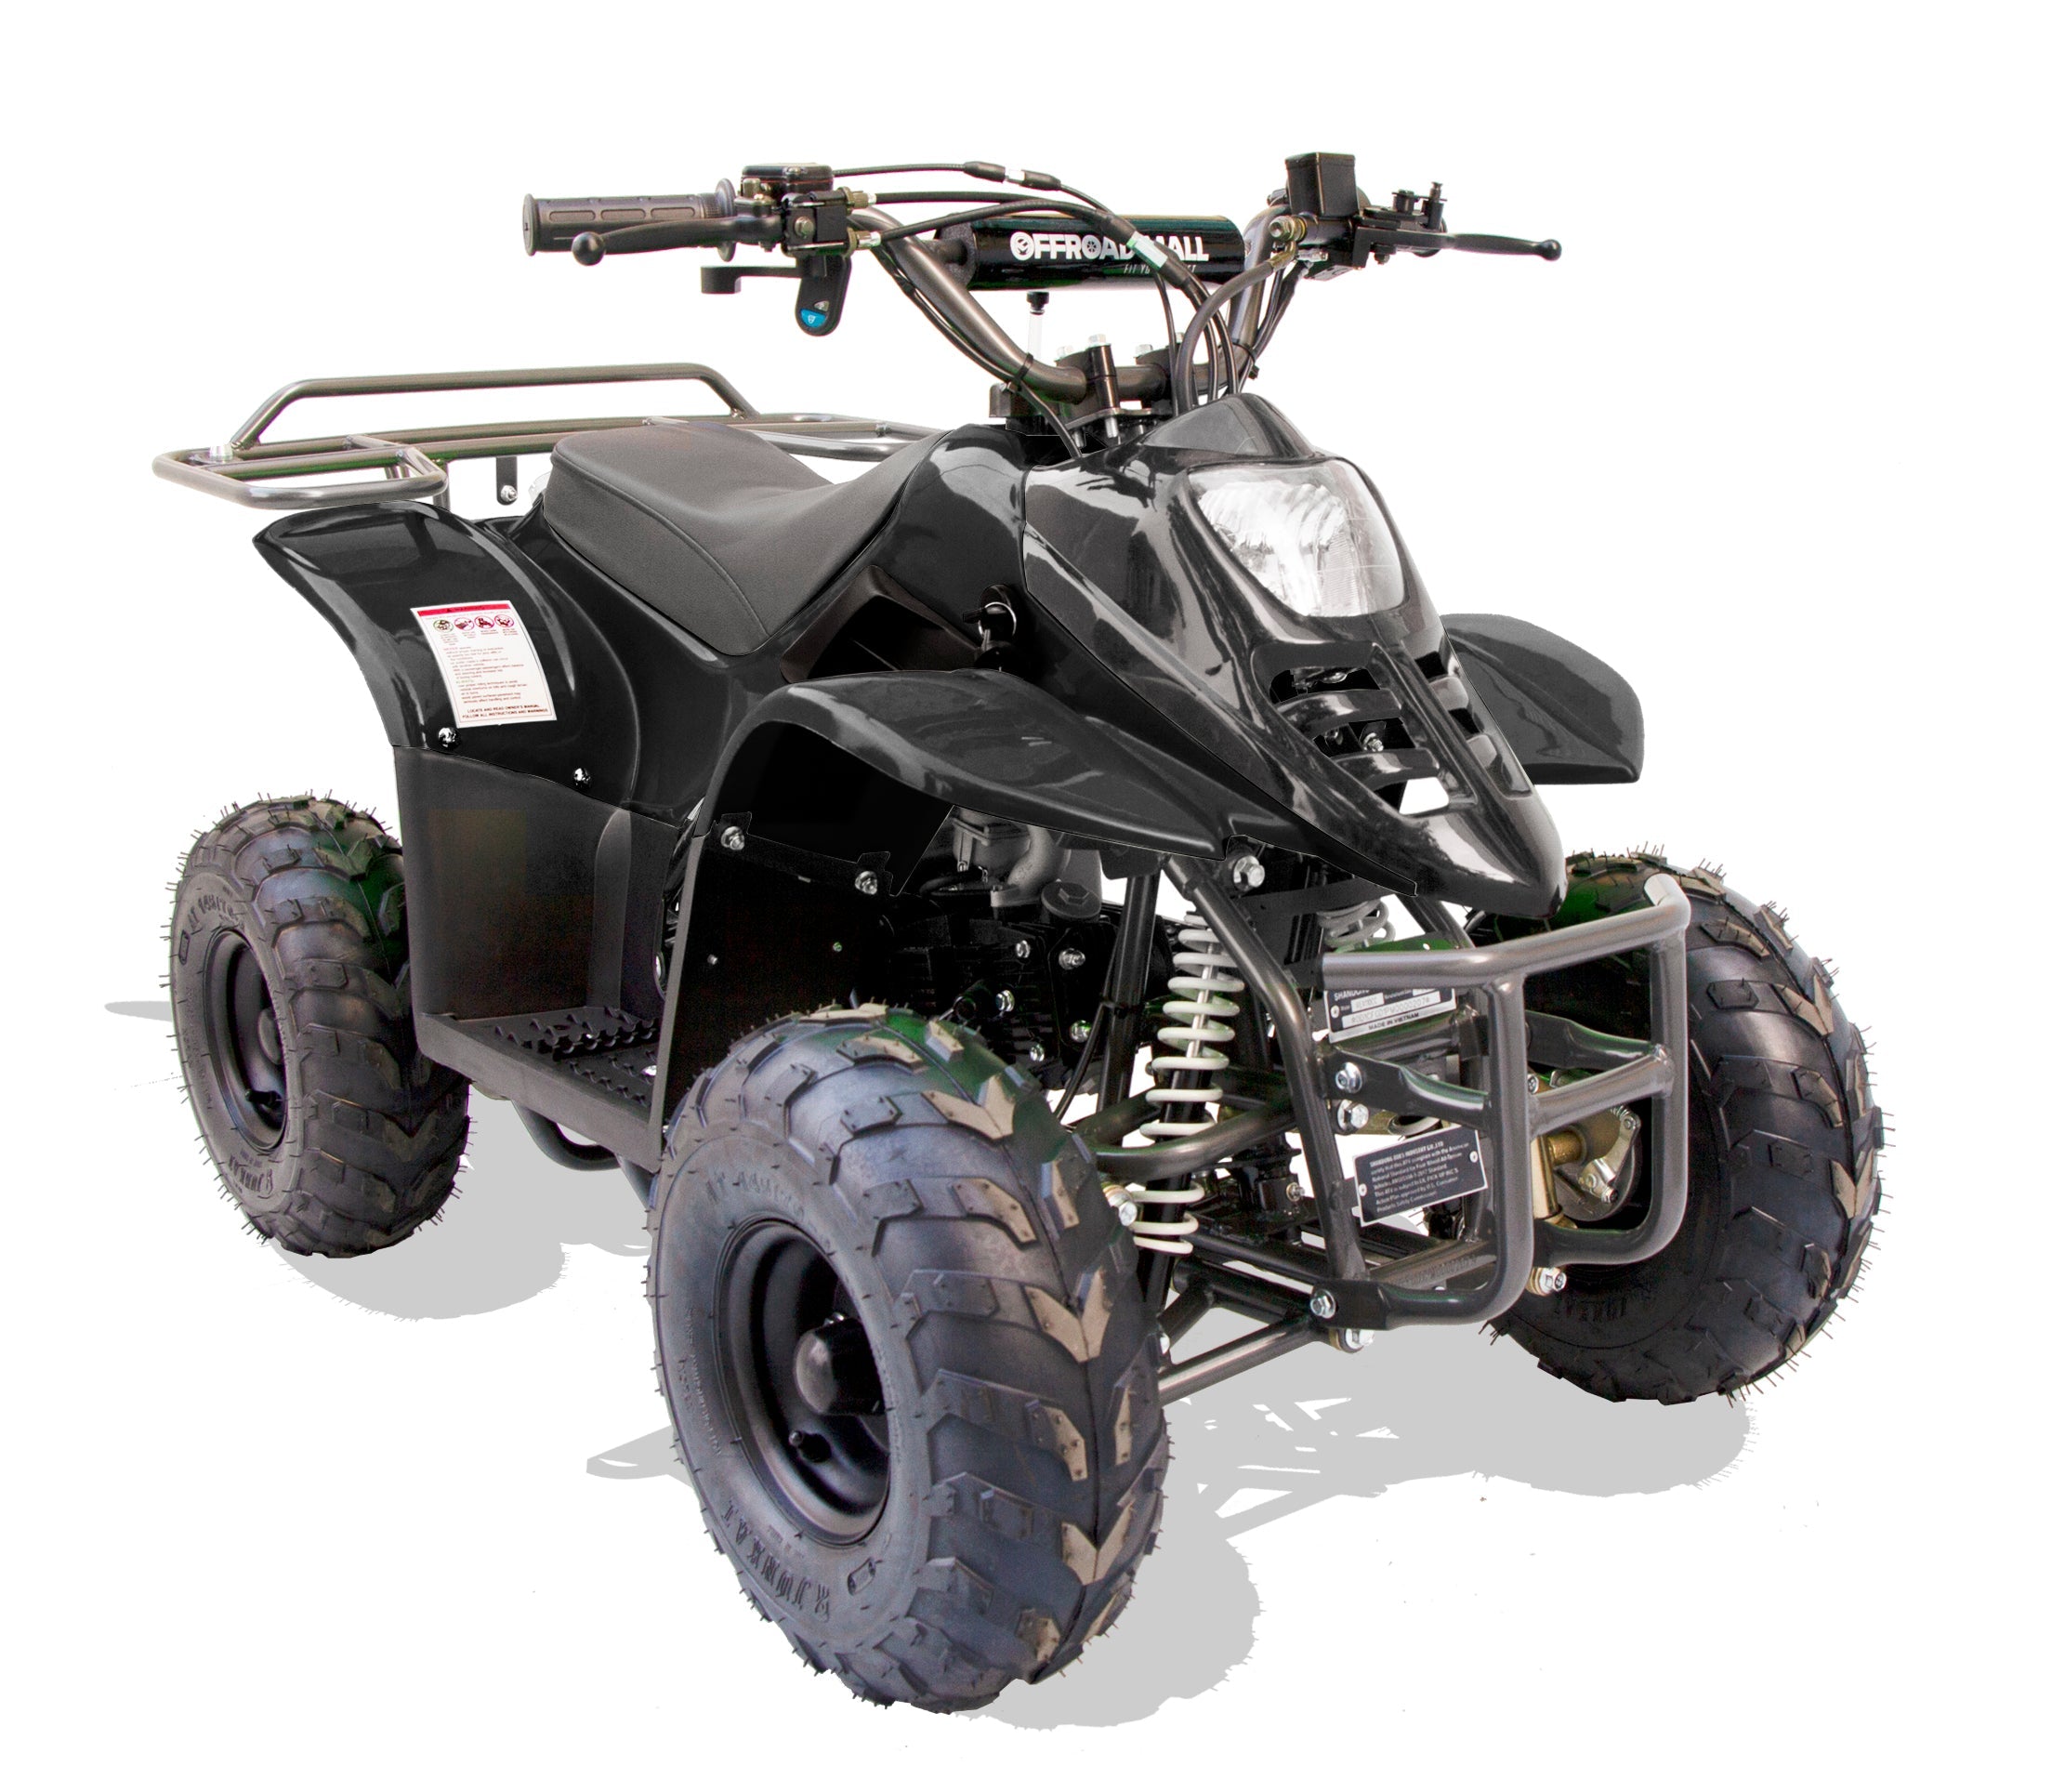 110cc fully automatic gas ATV 4 wheeler for kids and youth